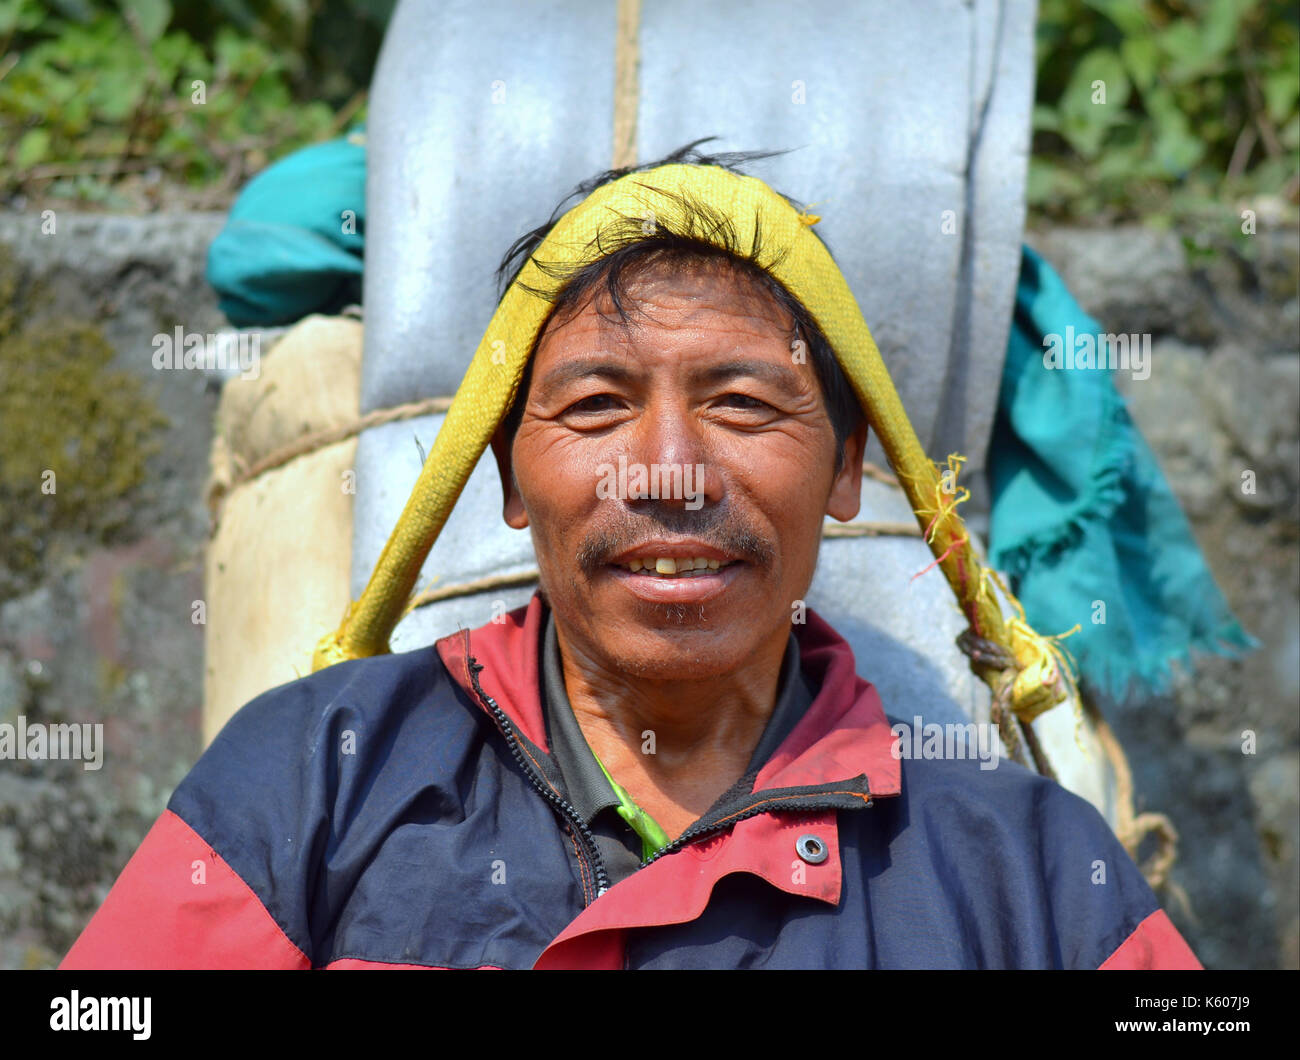 Nepali mountain porter (sherpa) with a heavy load takes a short break on a stone bench and smiles for the camera. Stock Photo